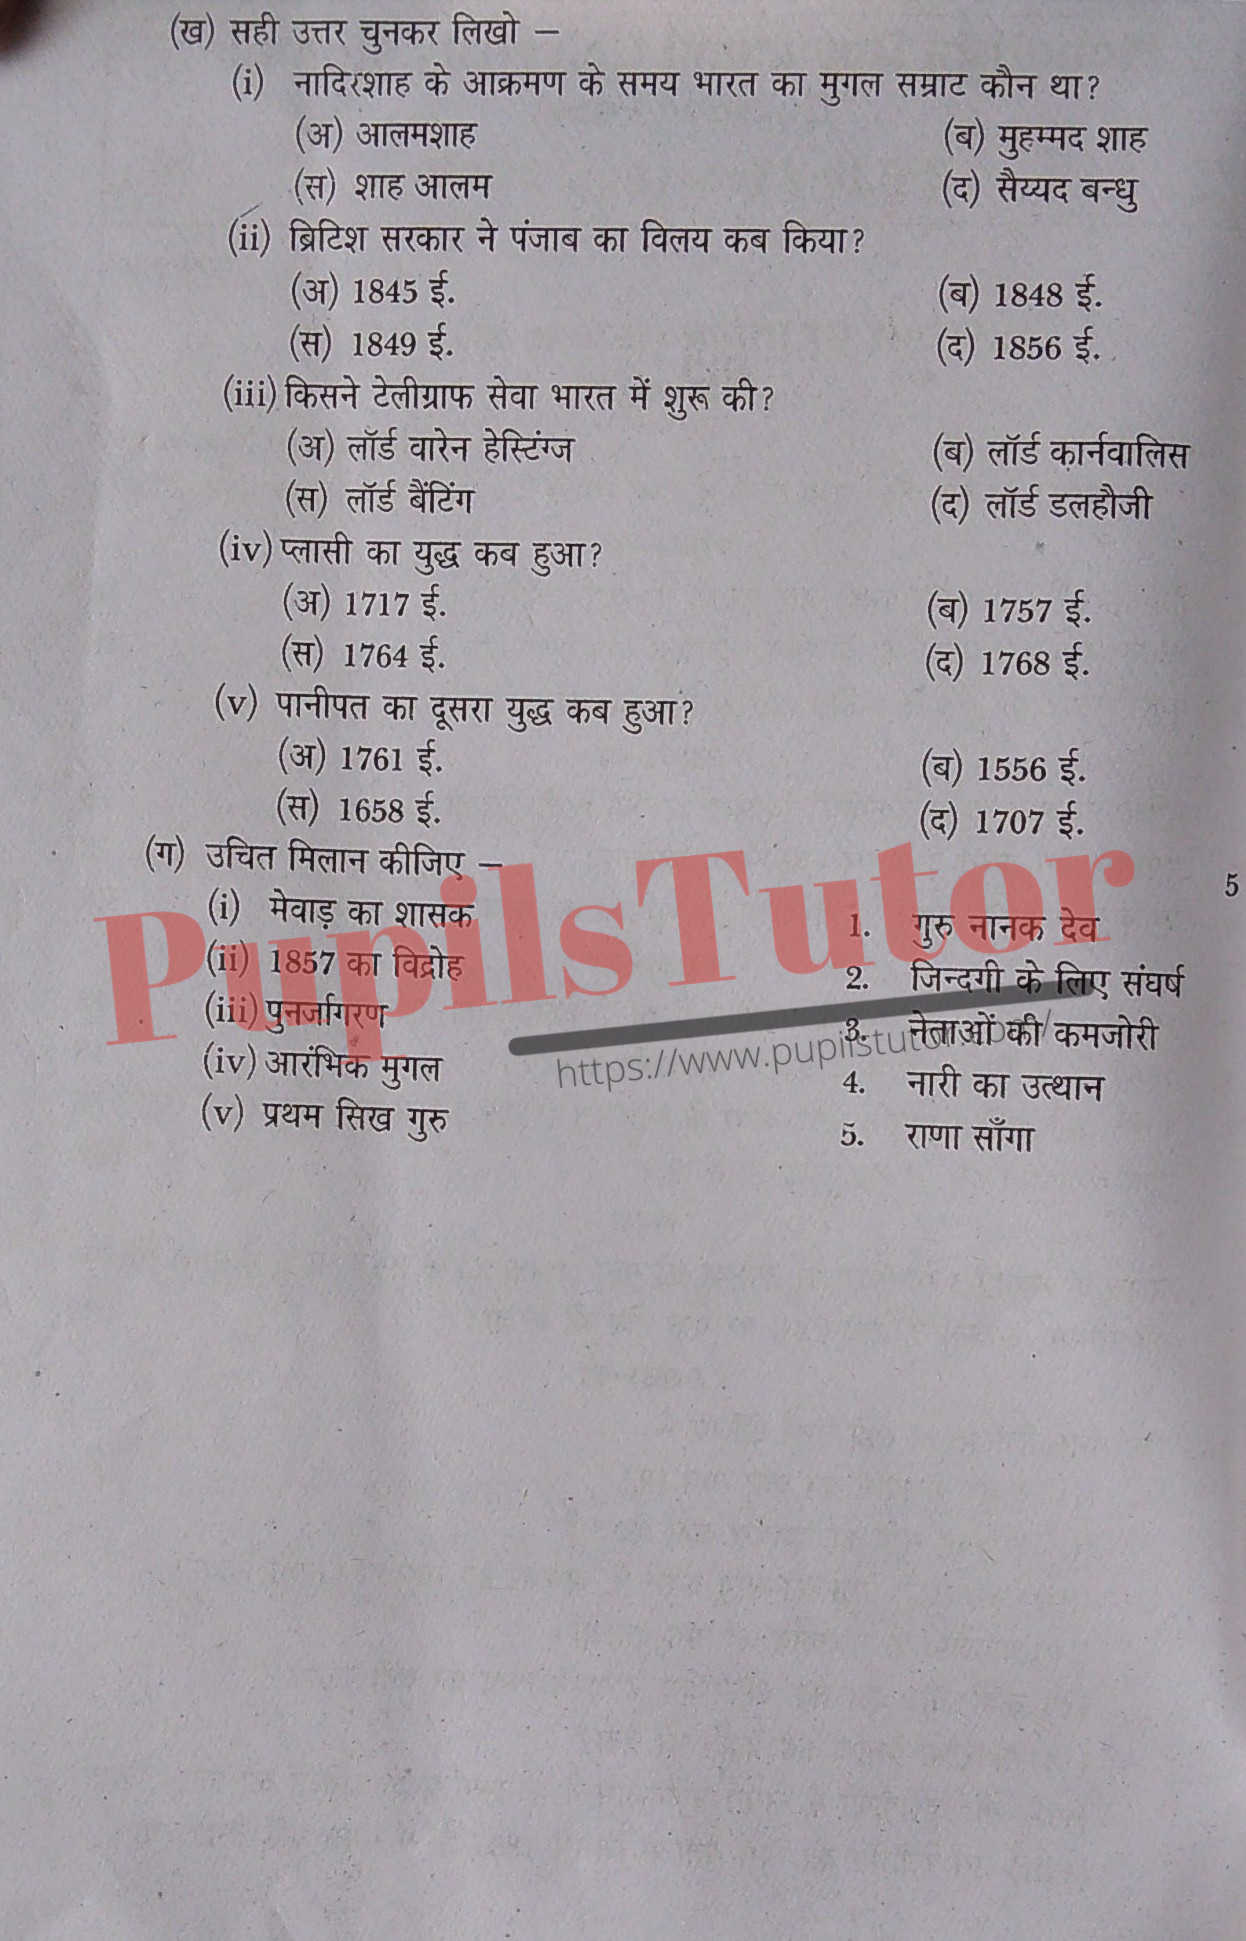 M.D. University B.A. History Of India (1526 To 1857 AD) Third Semester Important Question Answer And Solution - www.pupilstutor.com (Paper Page Number 2)